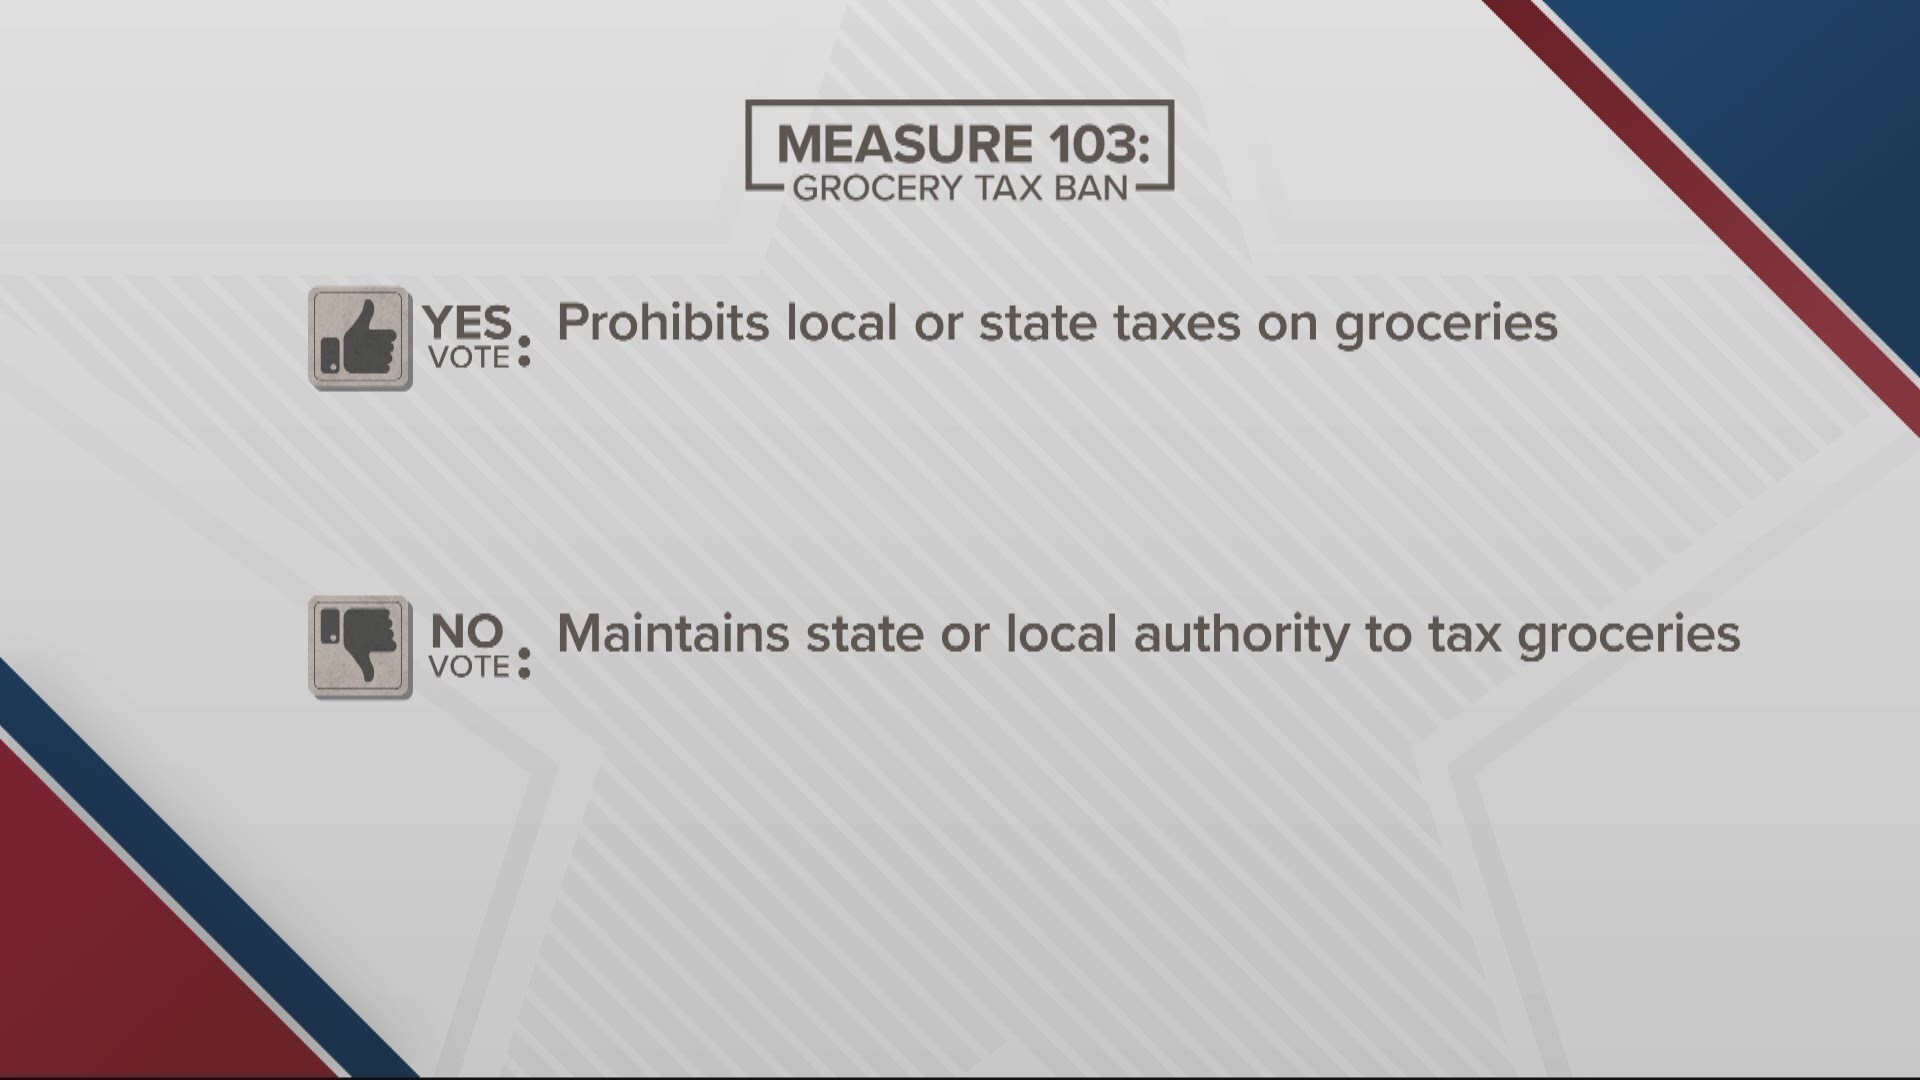 KGW political analyst Len Bergstein breaks down Measure 103, which would prohibit state and local taxes on groceries.